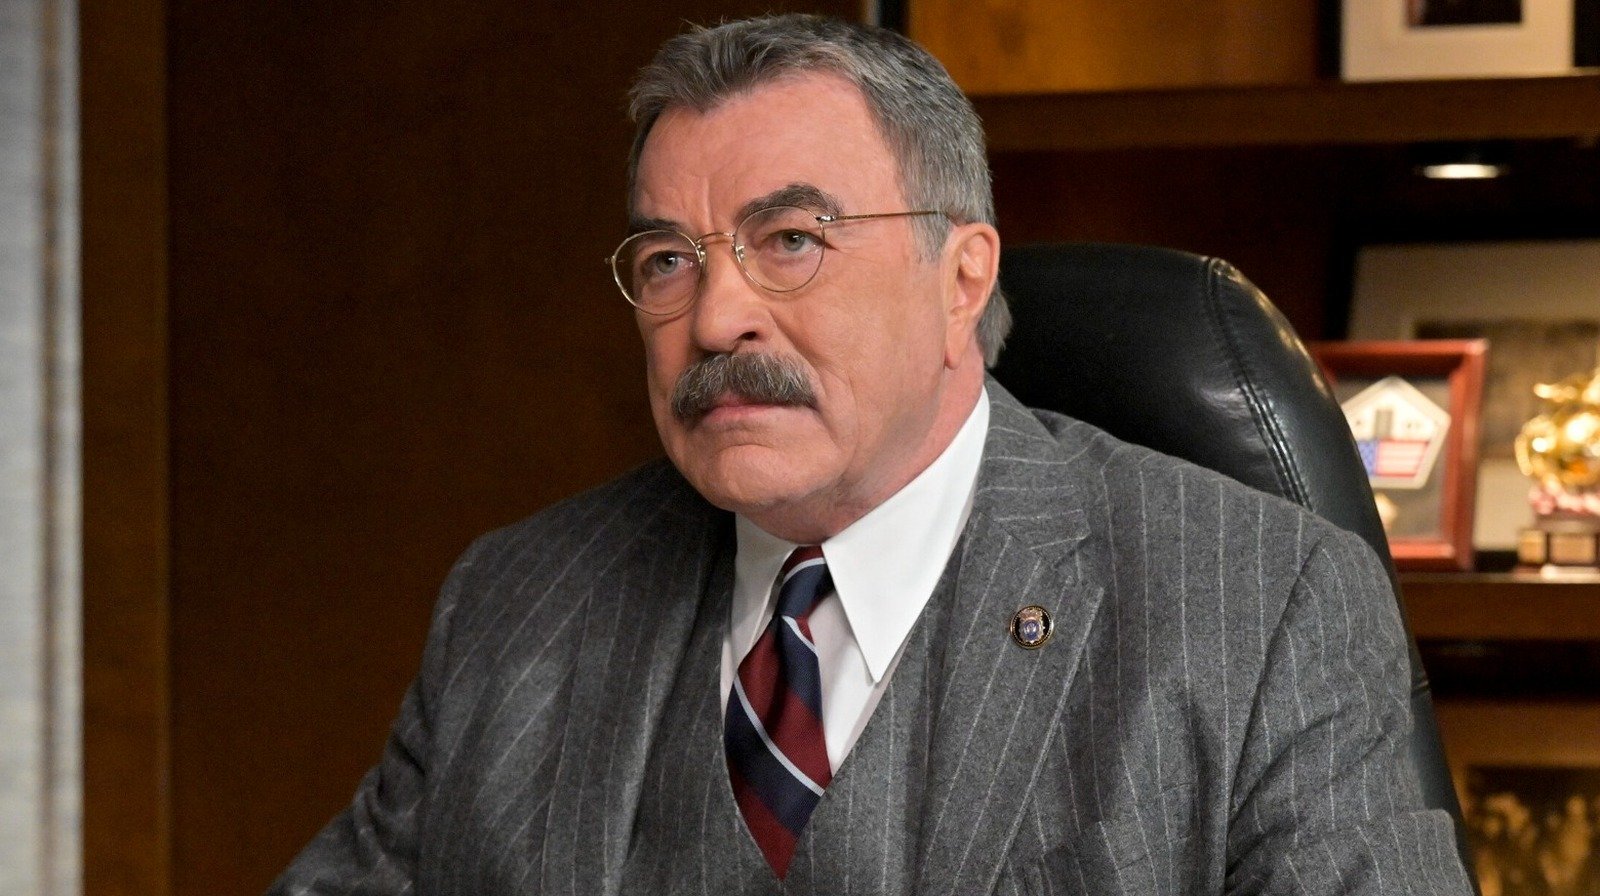 CBS Renews Blue Bloods For A 14th Season (With A Significant Pay Cut)